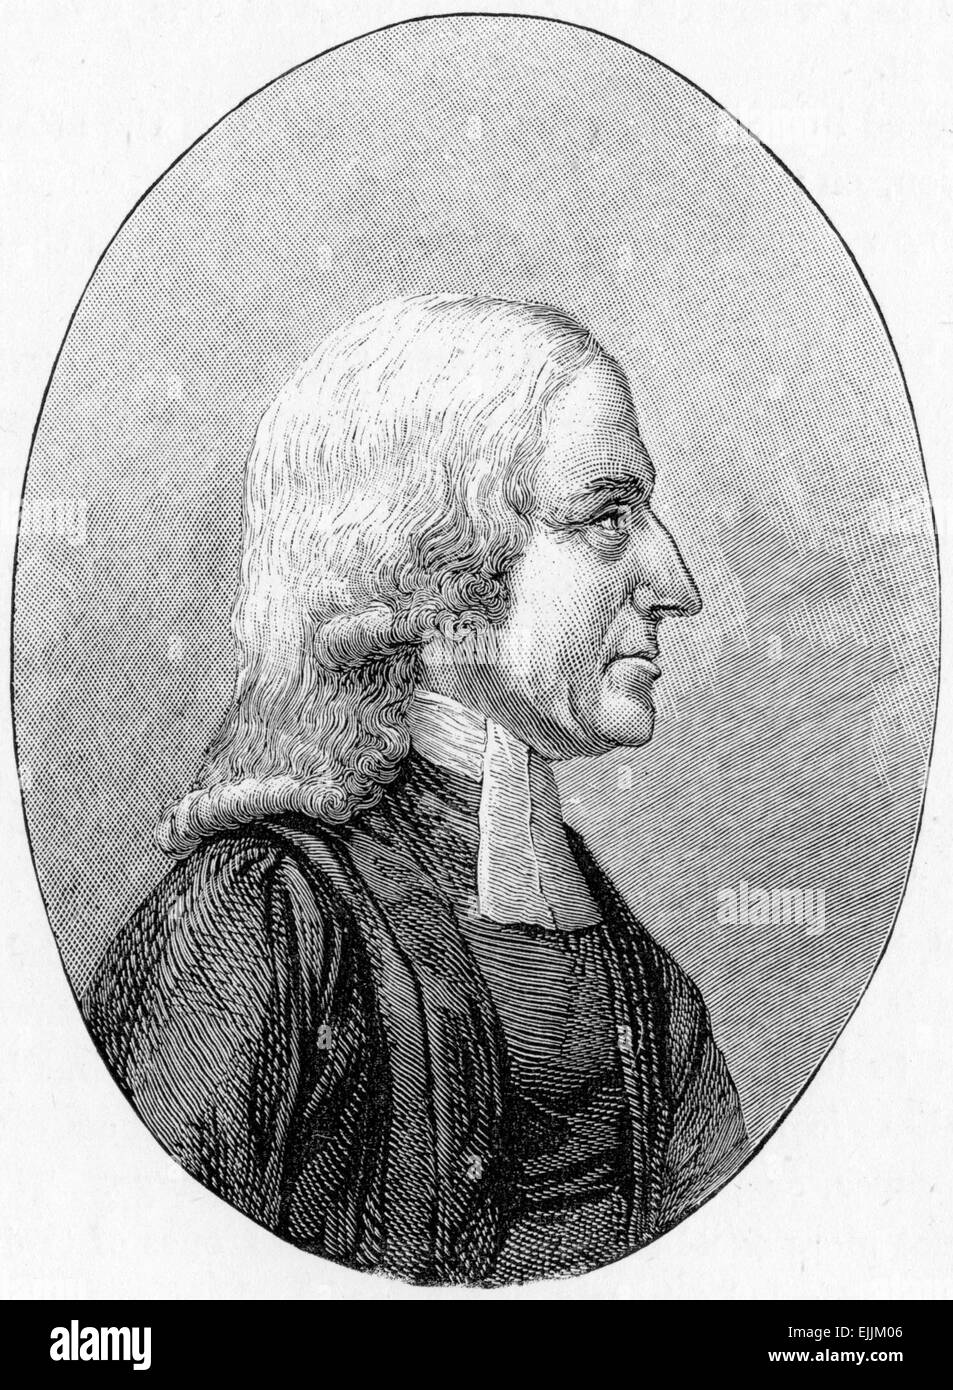 John Wesley, from a portrait in the European Magazine, engraving from Selections from the Journal of John Wesley, 1891 Stock Photo